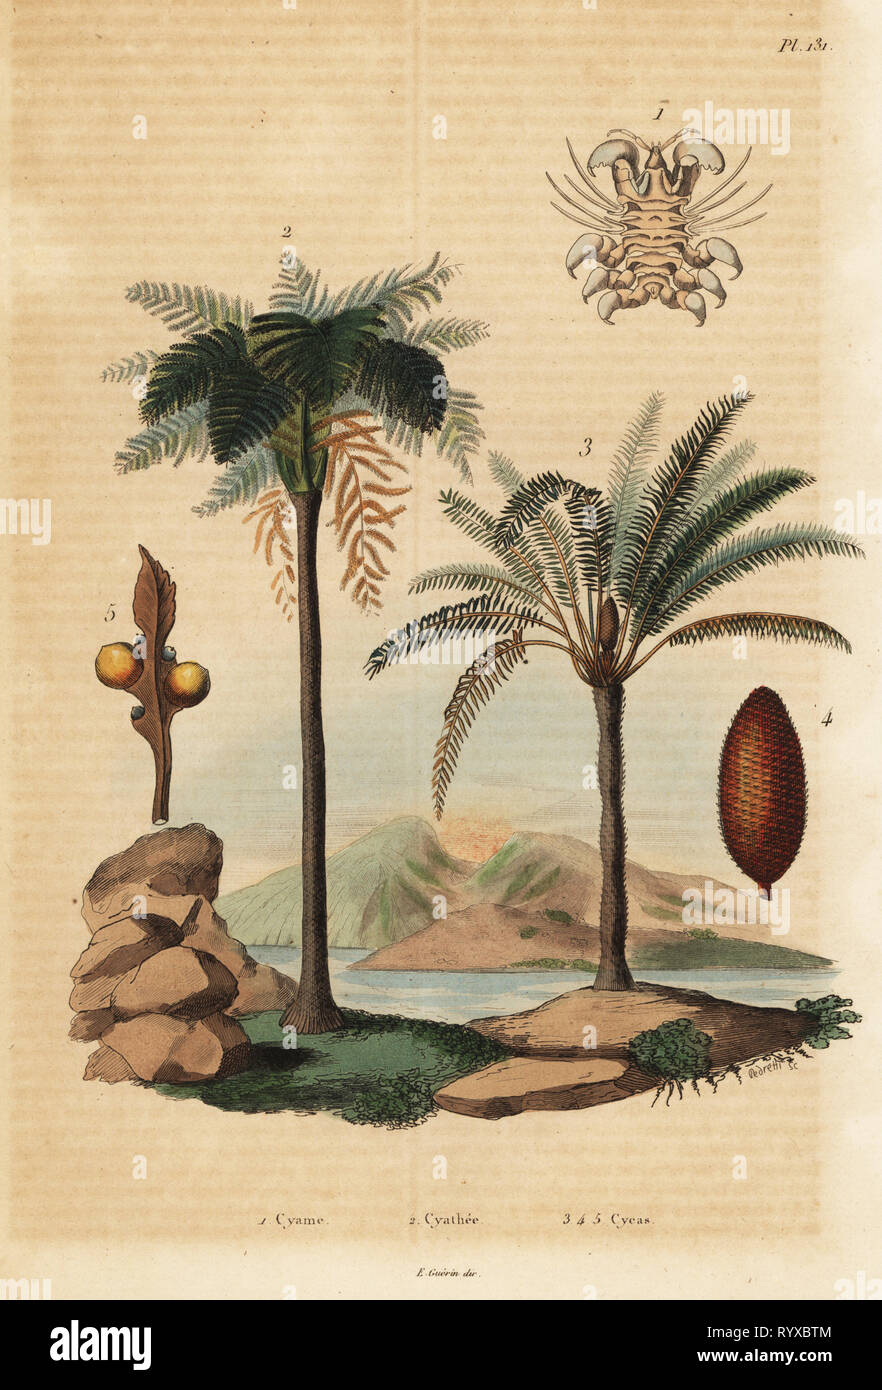 Whale louse, Cyamus ovalis 1, West Indian treefern, Cyathea arborea 2, and Japanese sago palm, Cycas revoluta 3-5. Cyame, Cyathee, Cycas. Handcoloured steel engraving rom Felix-Edouard Guerin-Meneville's Dictionnaire Pittoresque d'Histoire Naturelle (Picturesque Dictionary of Natural History), Paris, 1834-39. Stock Photo